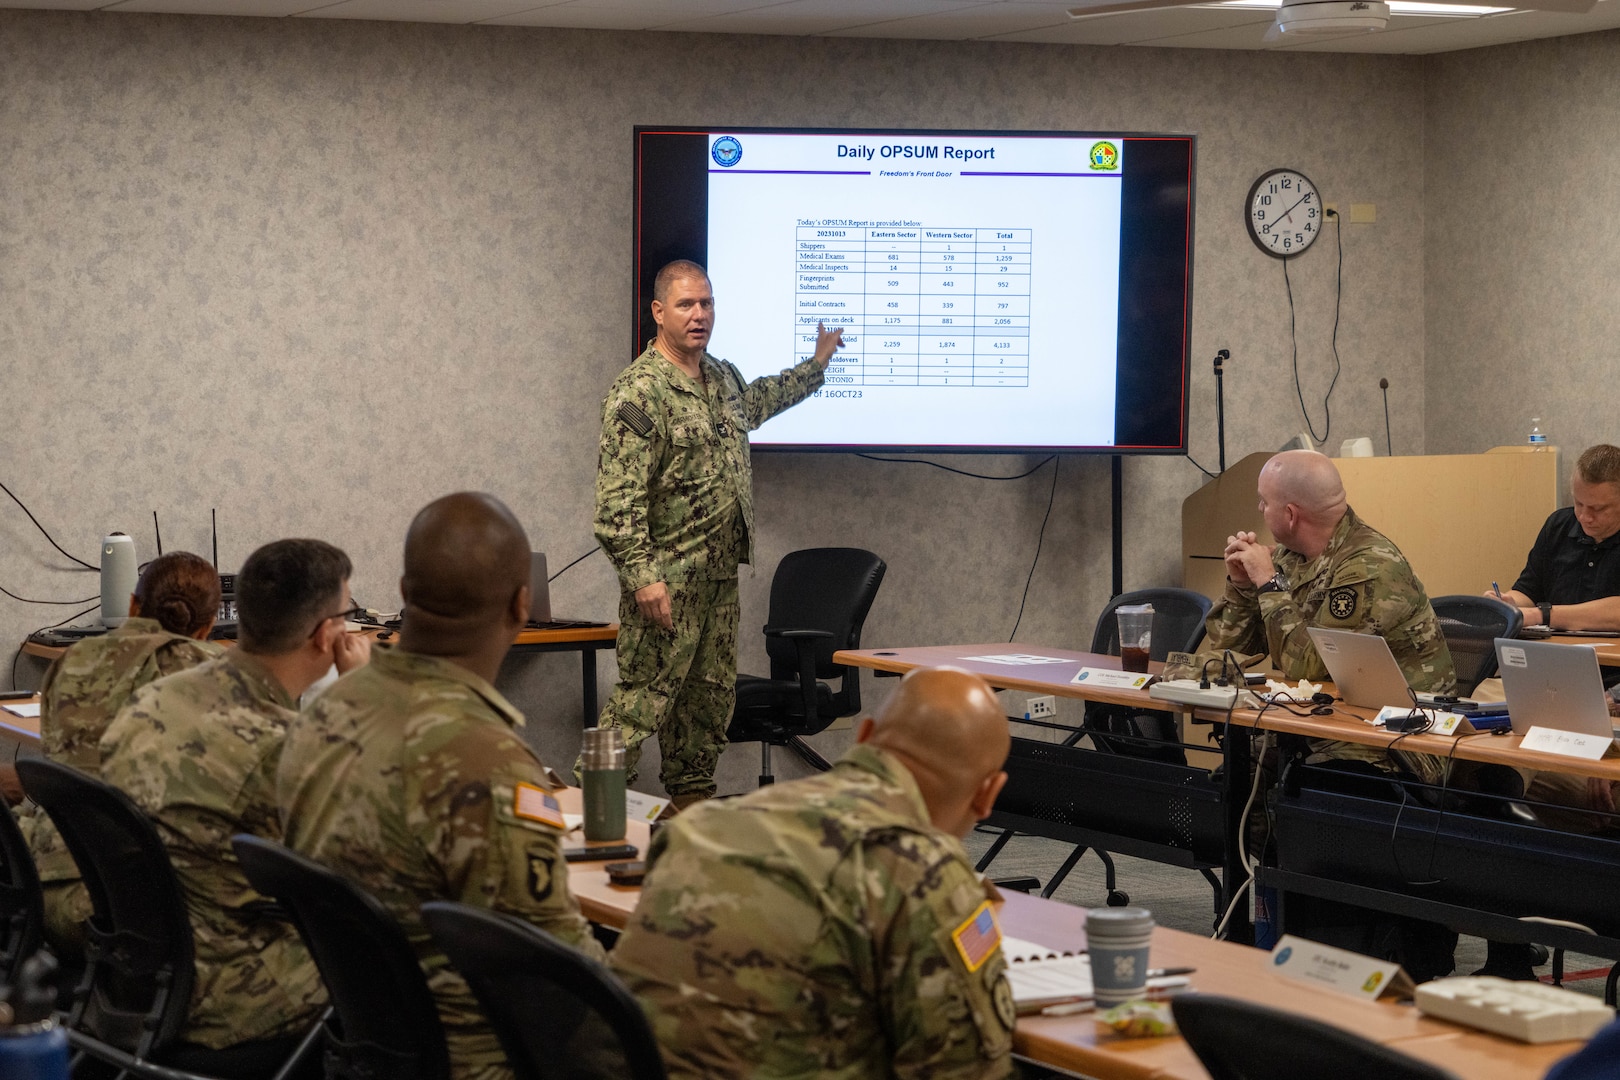 Navy Capt. Chris Carmichael briefs during the Recruiting Commanders/Operations Conference (RC/OC) at USMEPCOM, in North Chicago, Illinois.